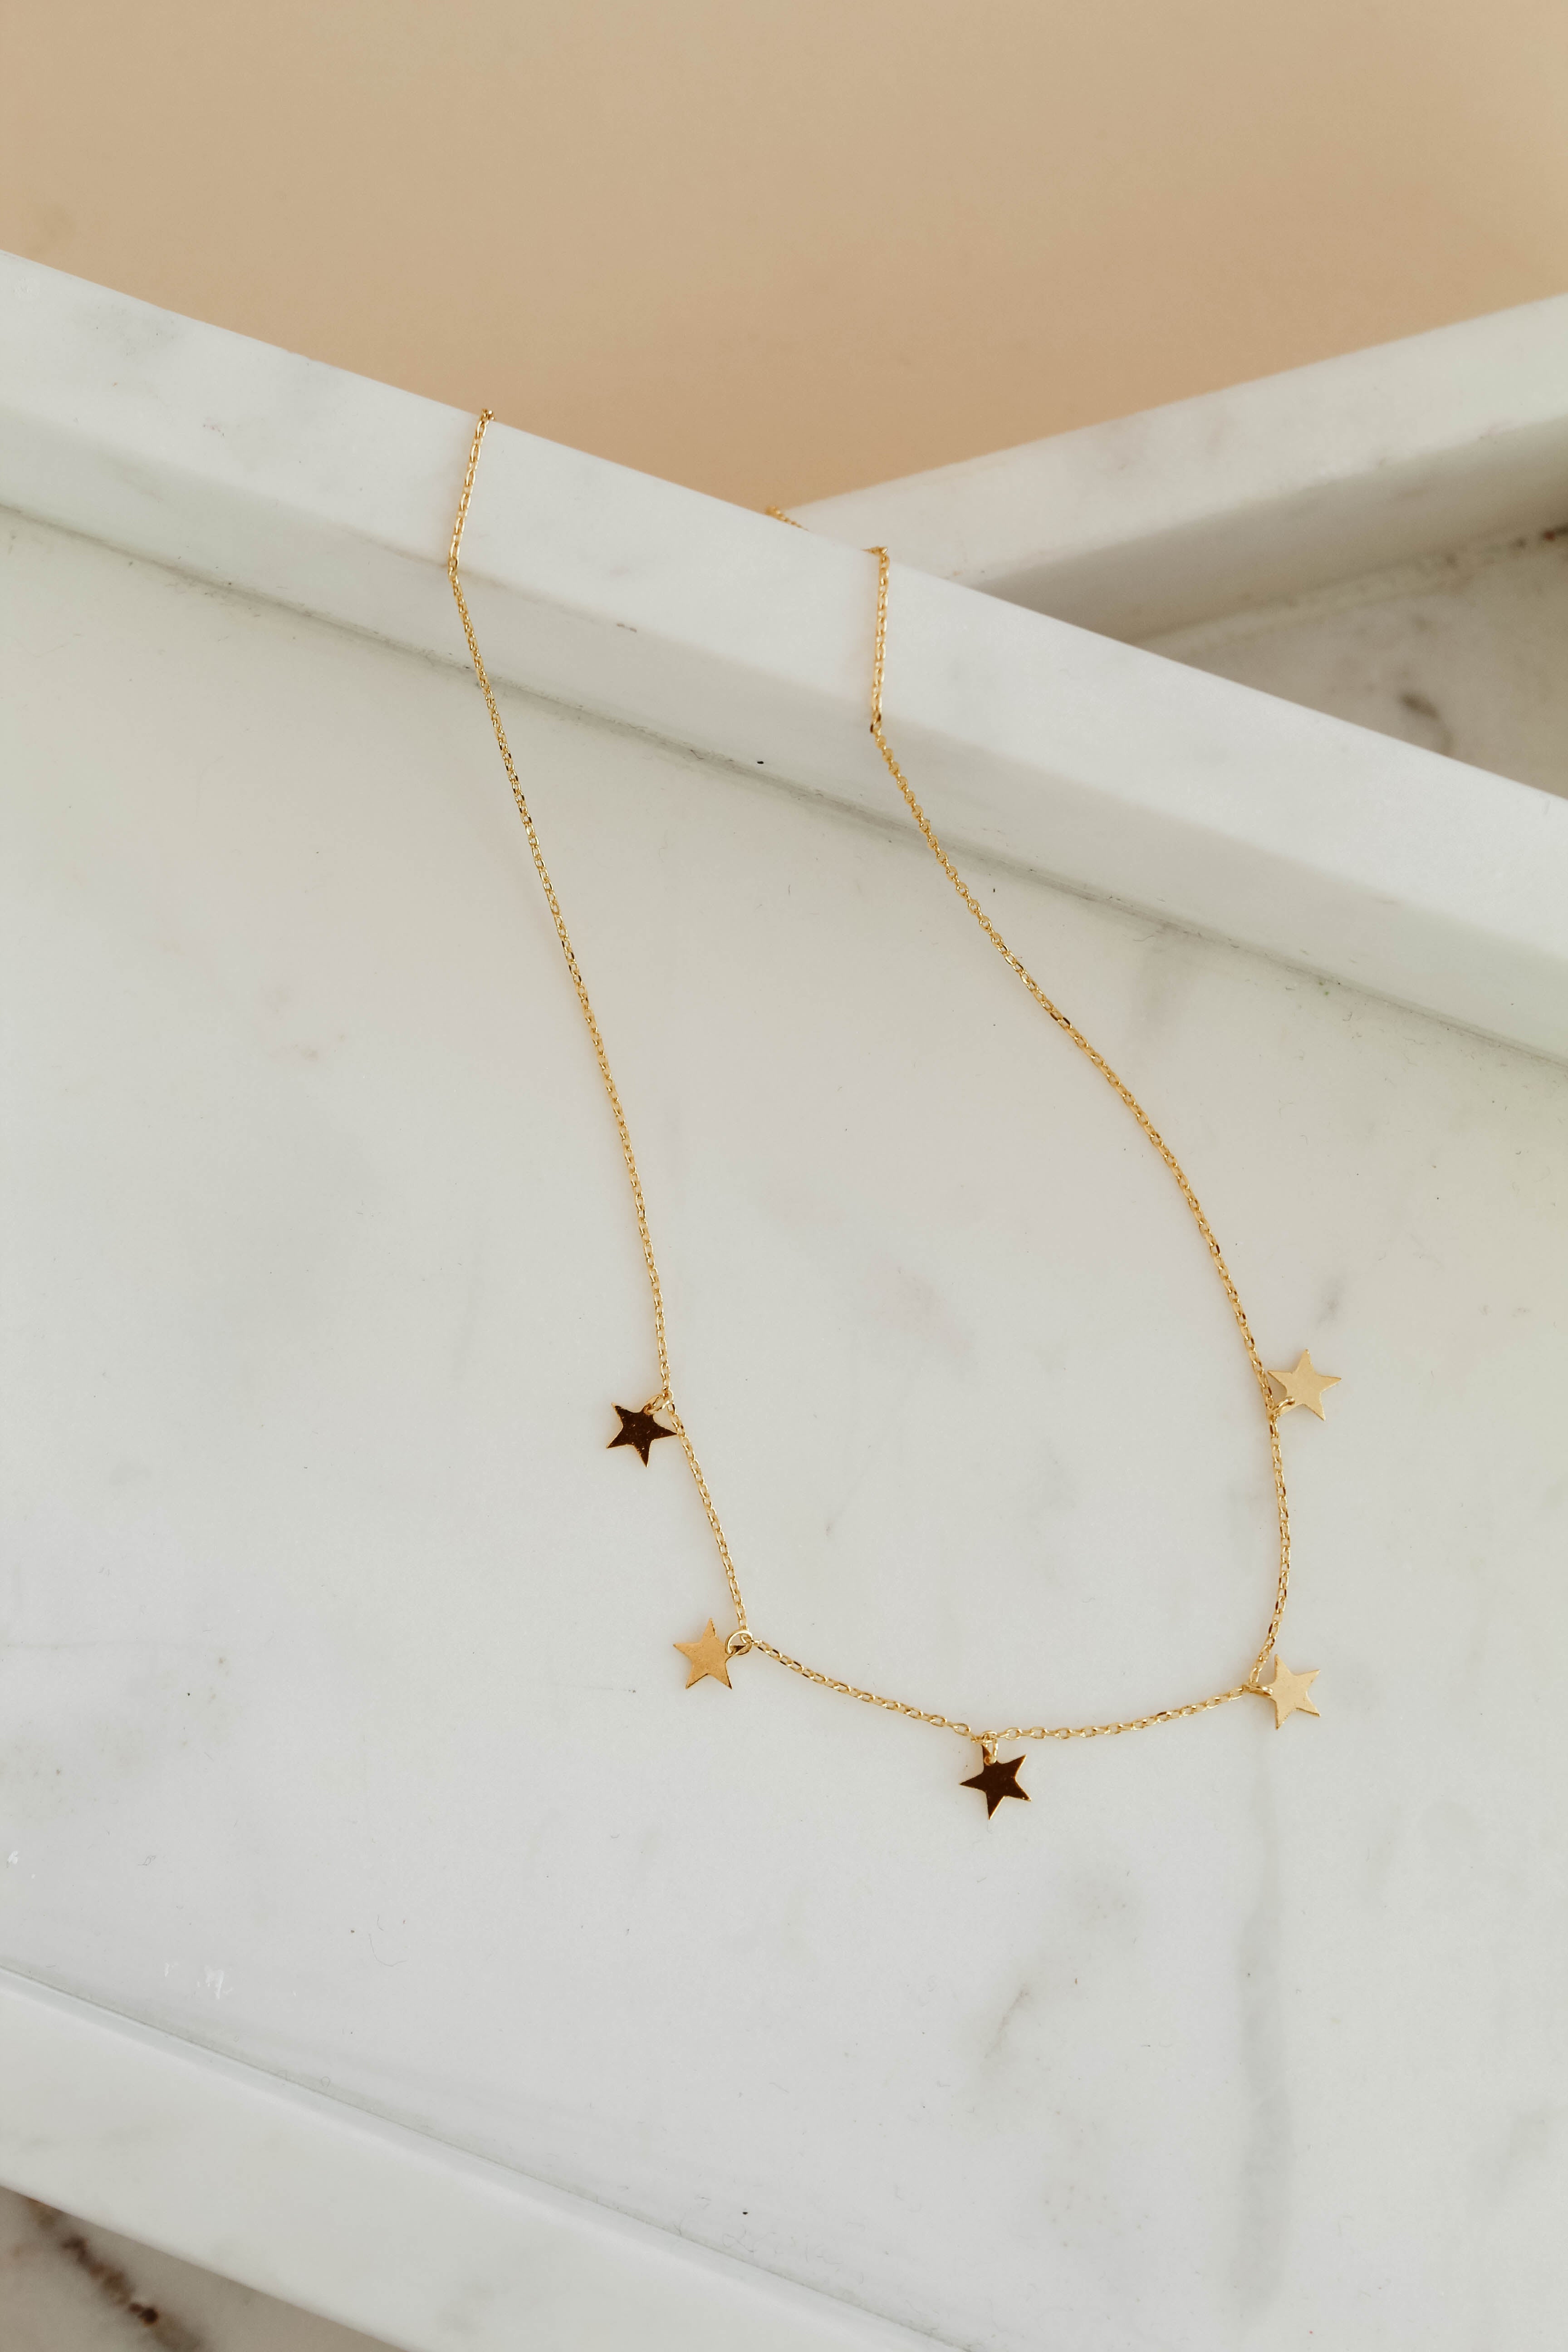 18 karat gold dipped dainty star charm necklace